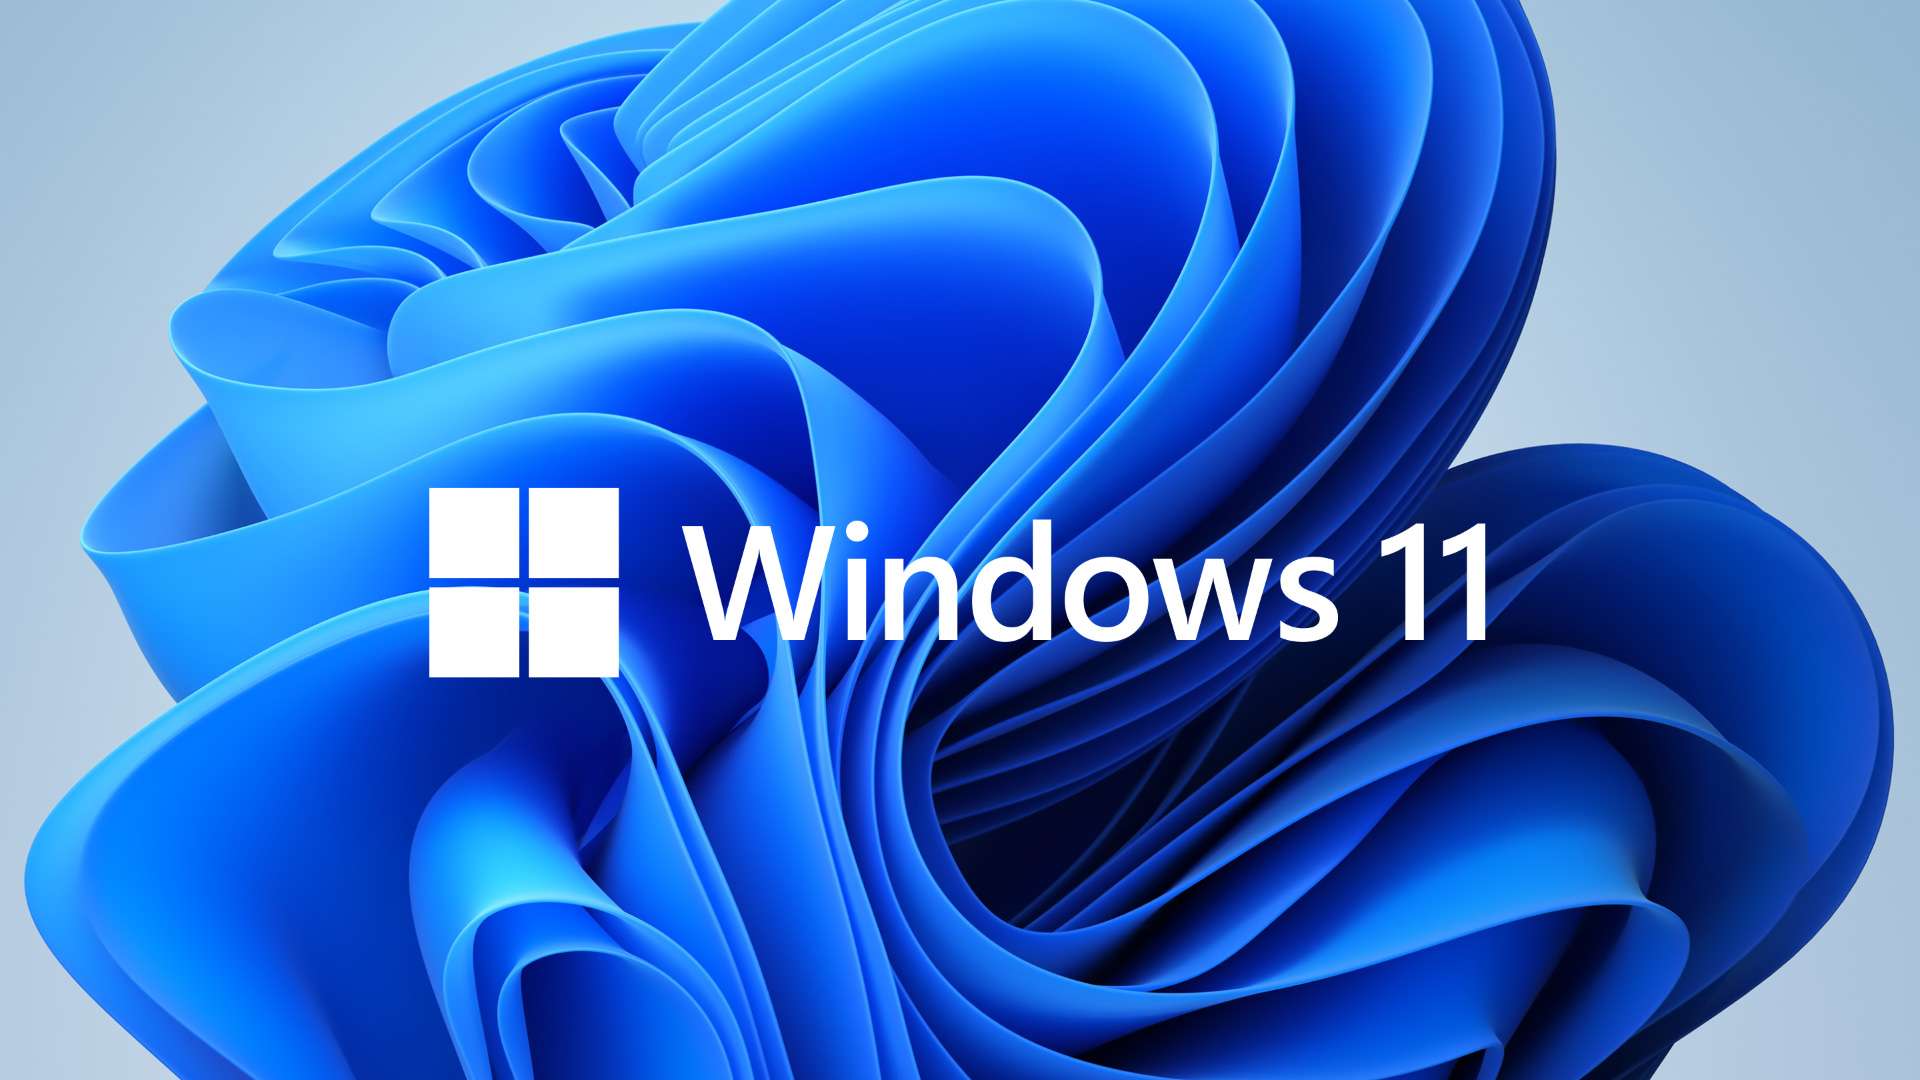 Windows 11 New Changes and Features